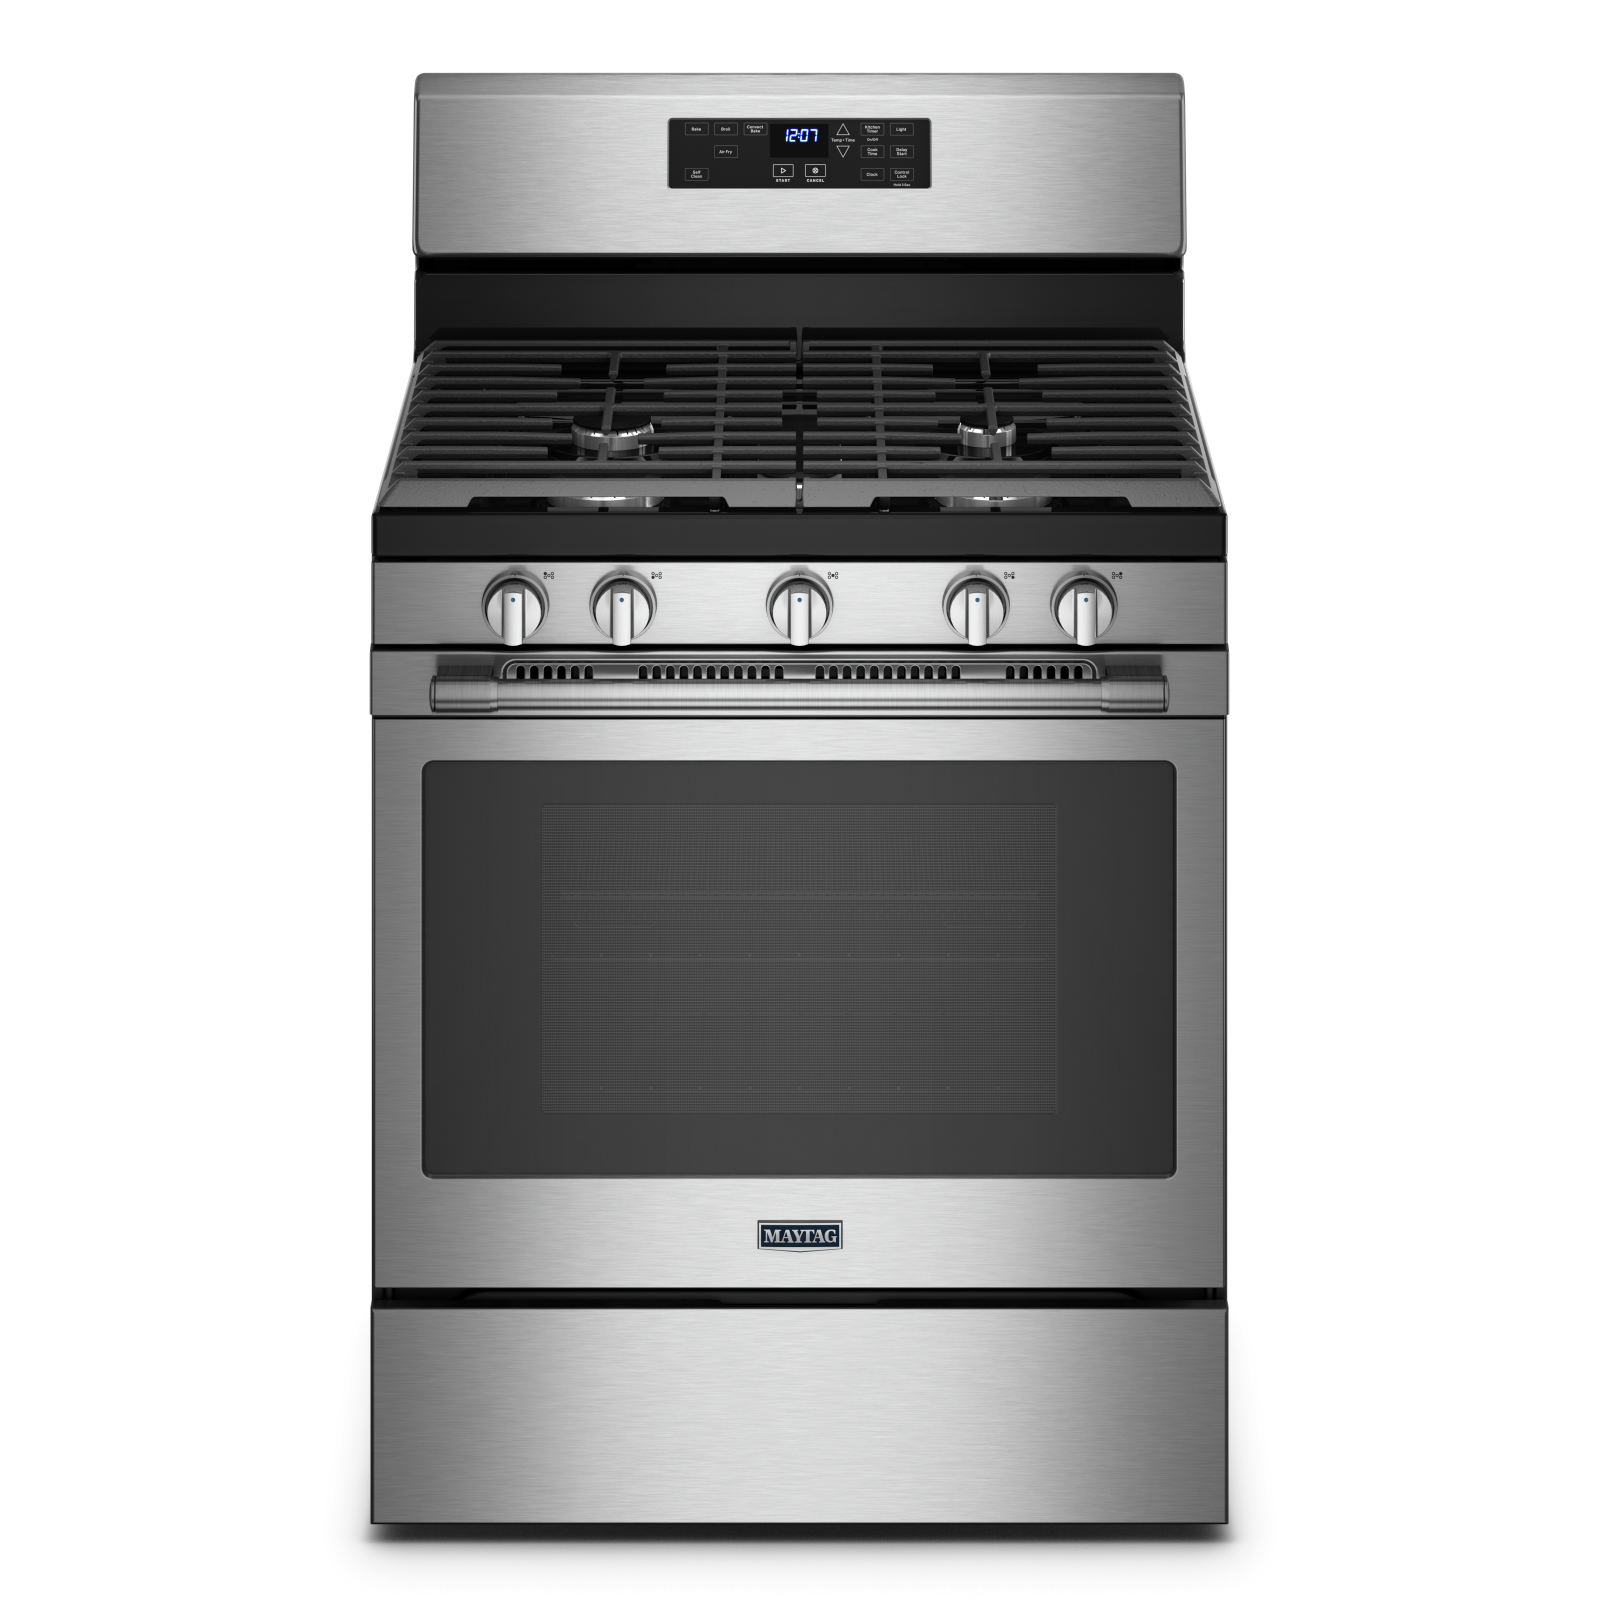 Maytag - 5 cu. ft  Gas Range in Stainless - MGR7700LZ